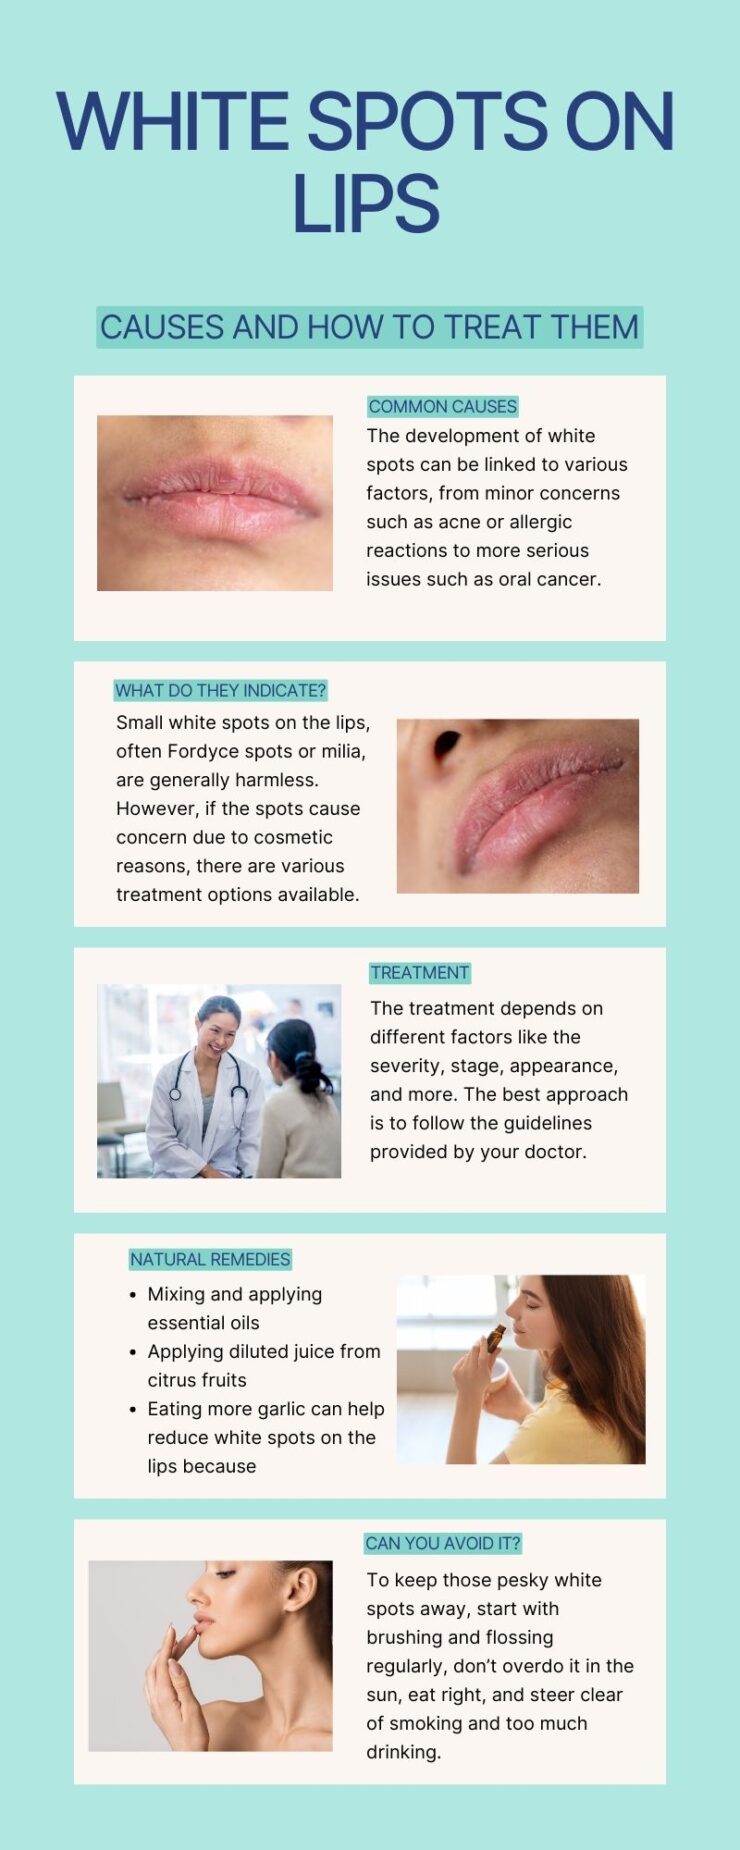 White Spots on Lips causes and treatment